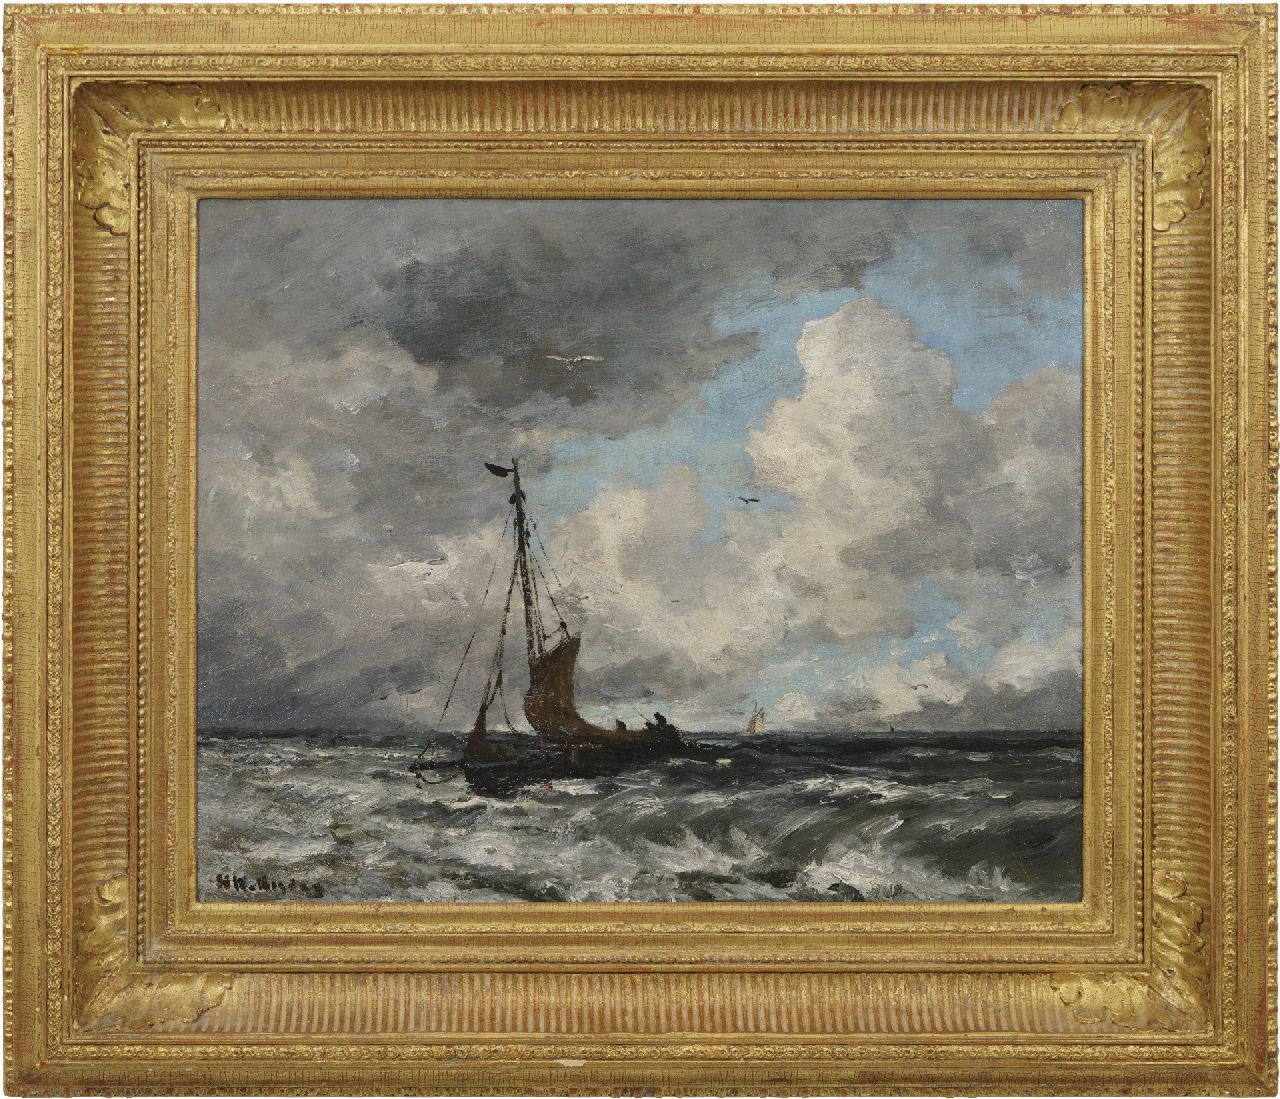 Mesdag H.W.  | Hendrik Willem Mesdag, Fishing smack on the North Sea, oil on canvas laid down on board 40.2 x 50.6 cm, signed l.l.